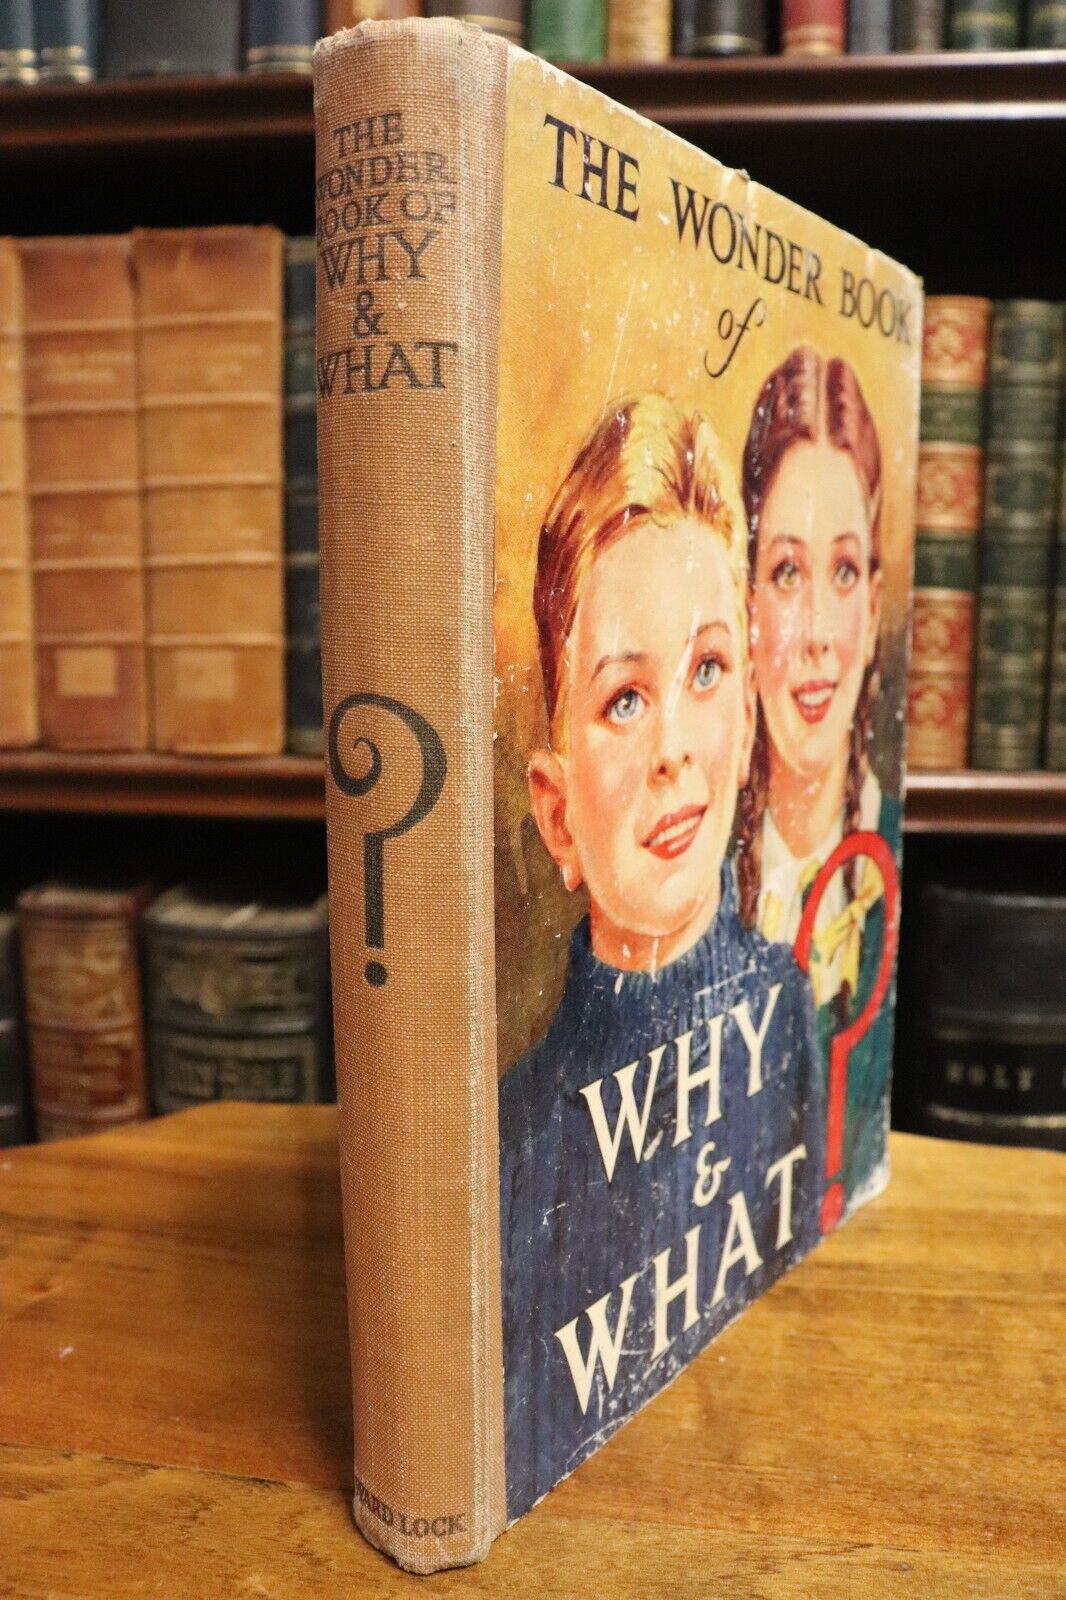 The Wonder Book Of Why & What - c1949 - Antique Childrens Book